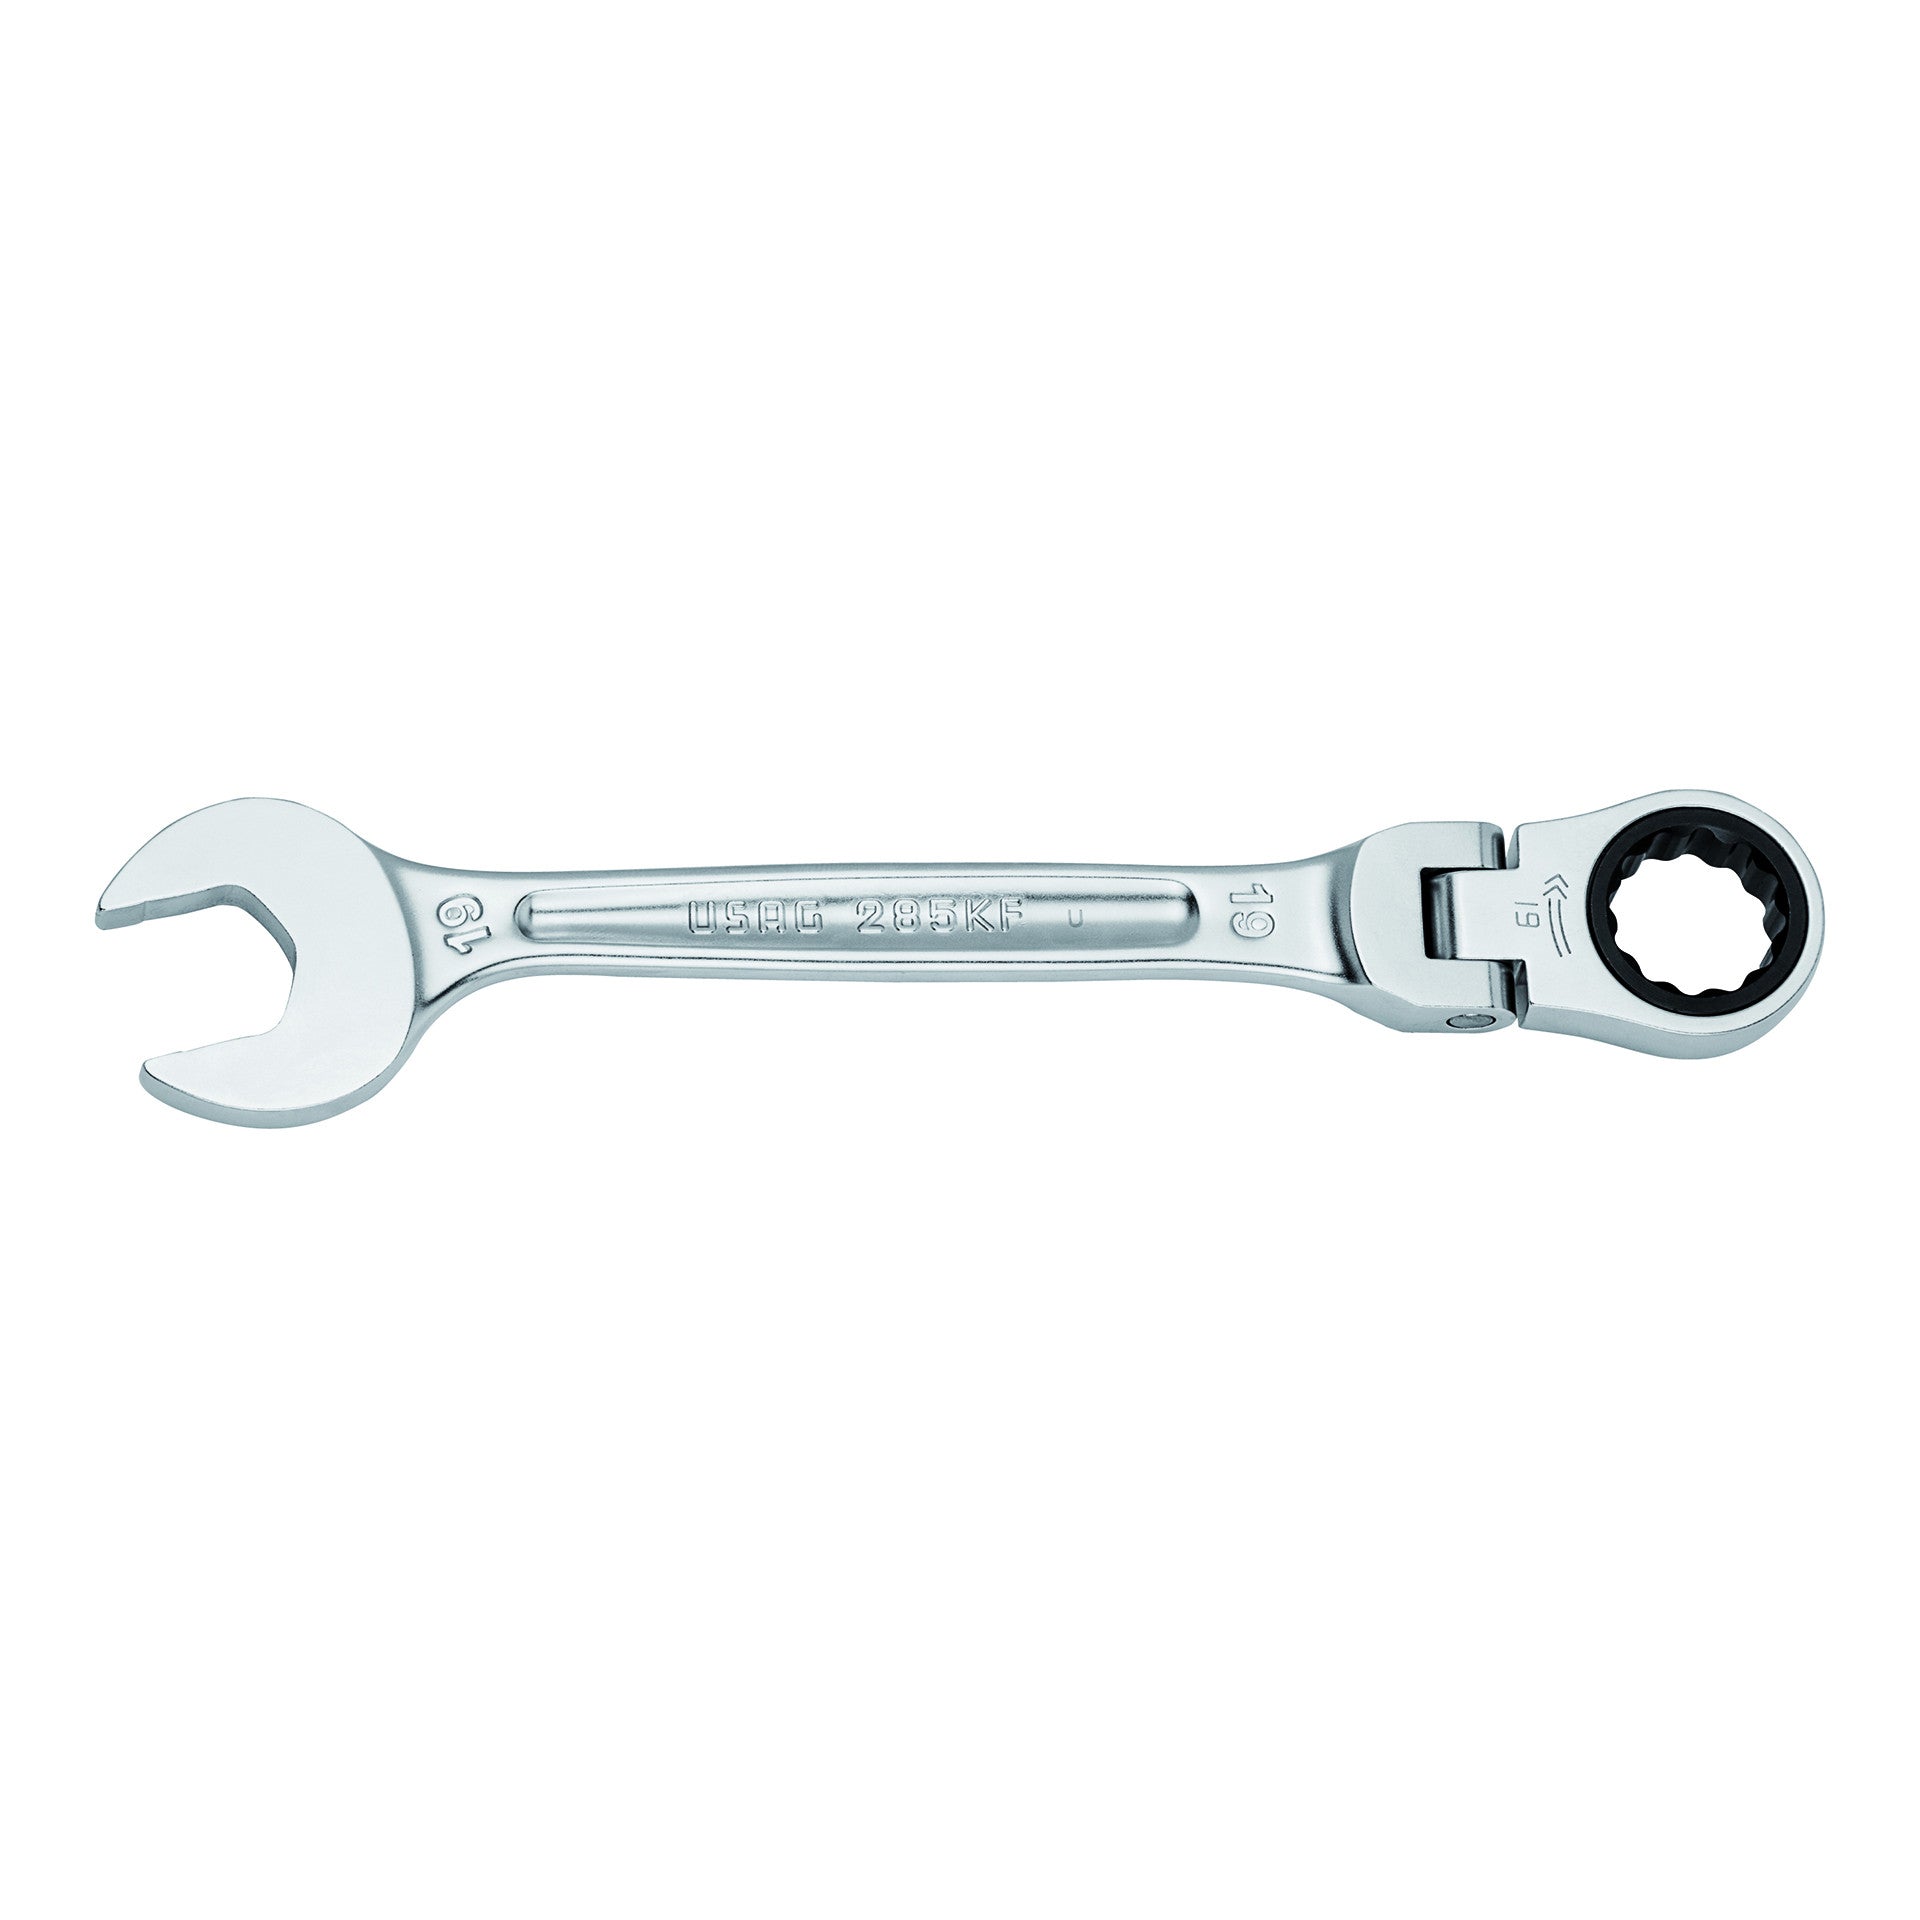 Combination ratchet jointed wrenches - Usag 285 KF